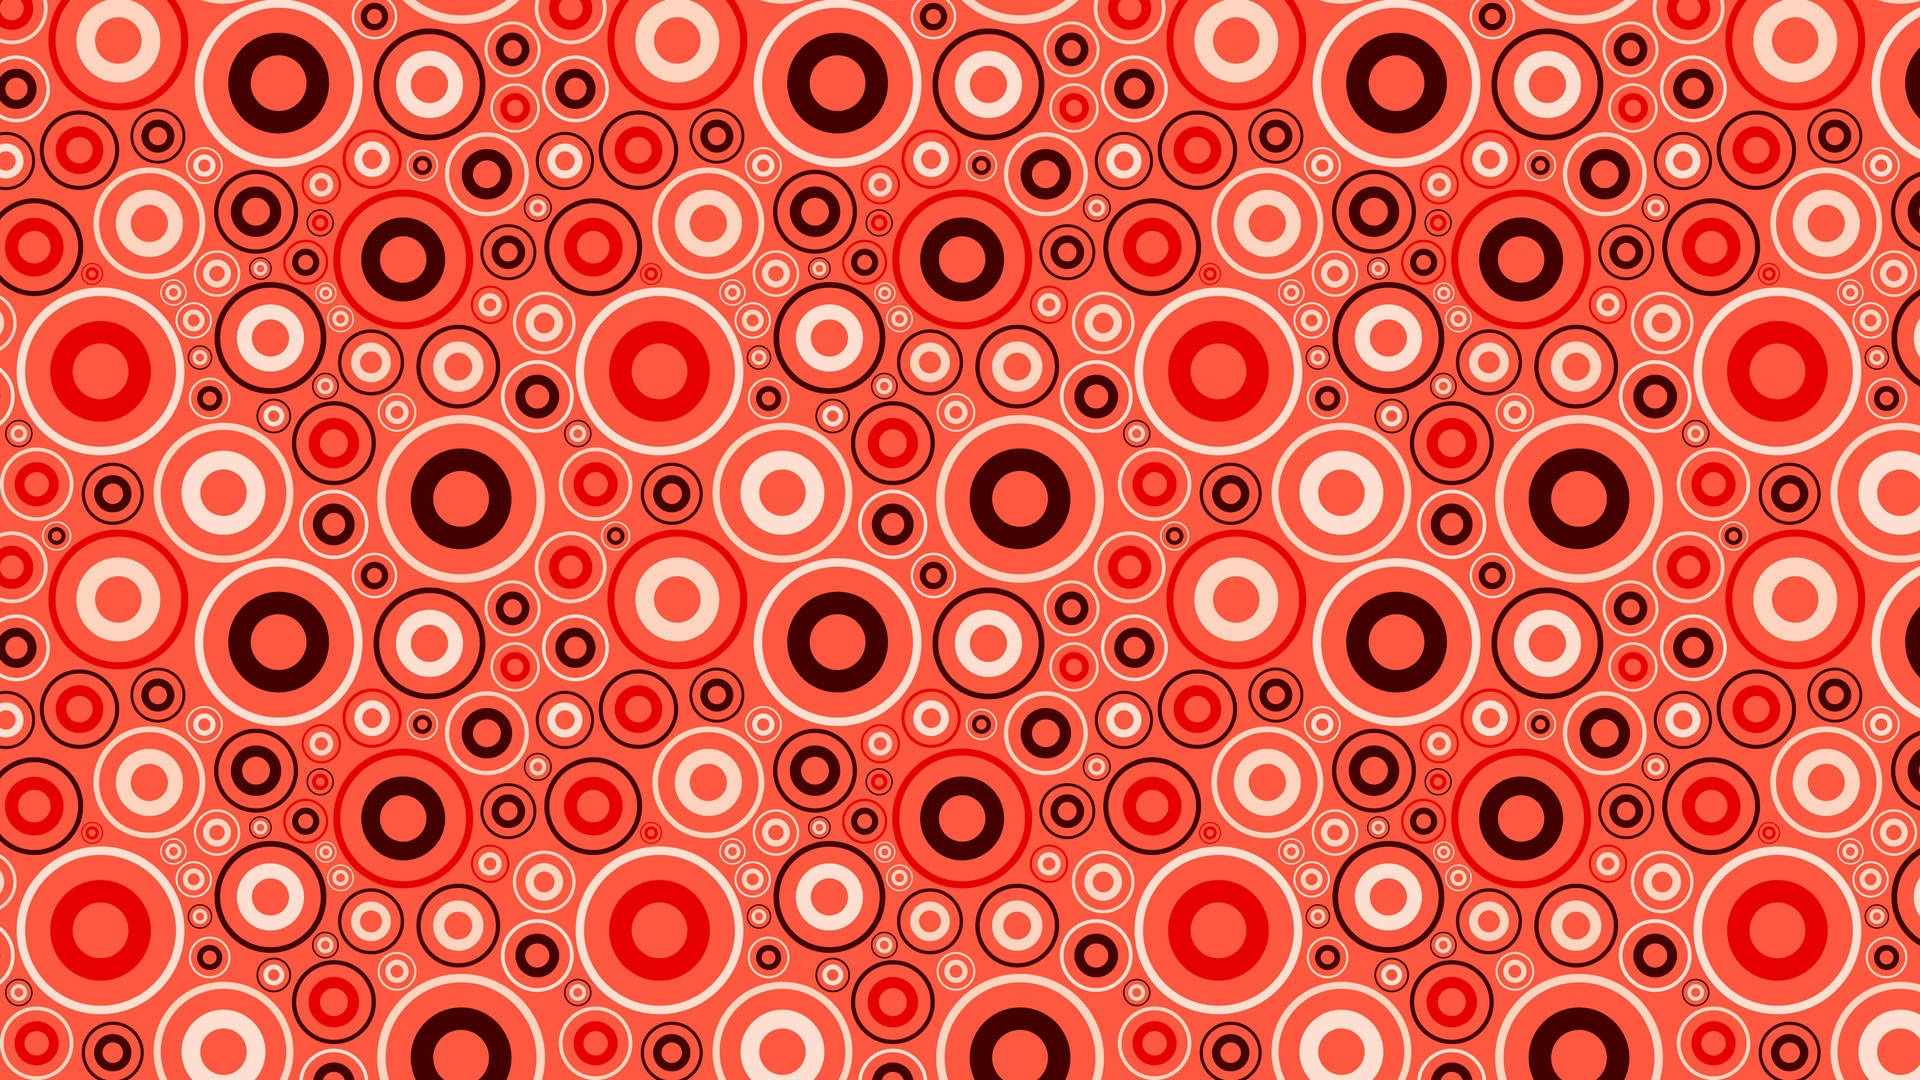 Red Circles With Black And White